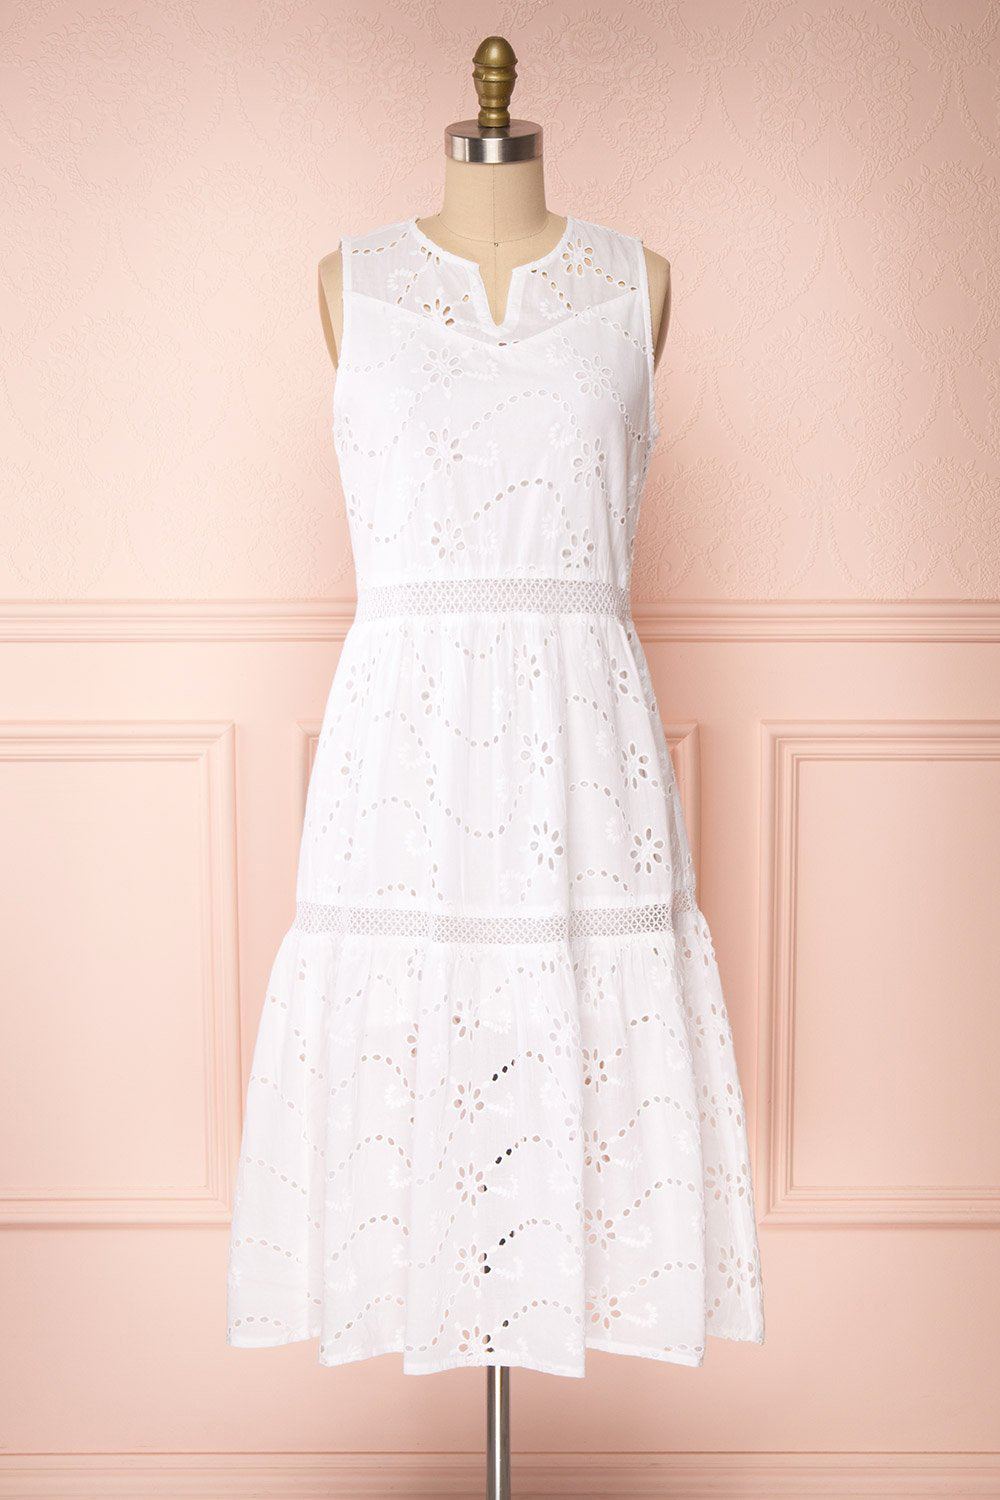 Chrysanthe White Openwork Lace Short Dress | Boutique 1861